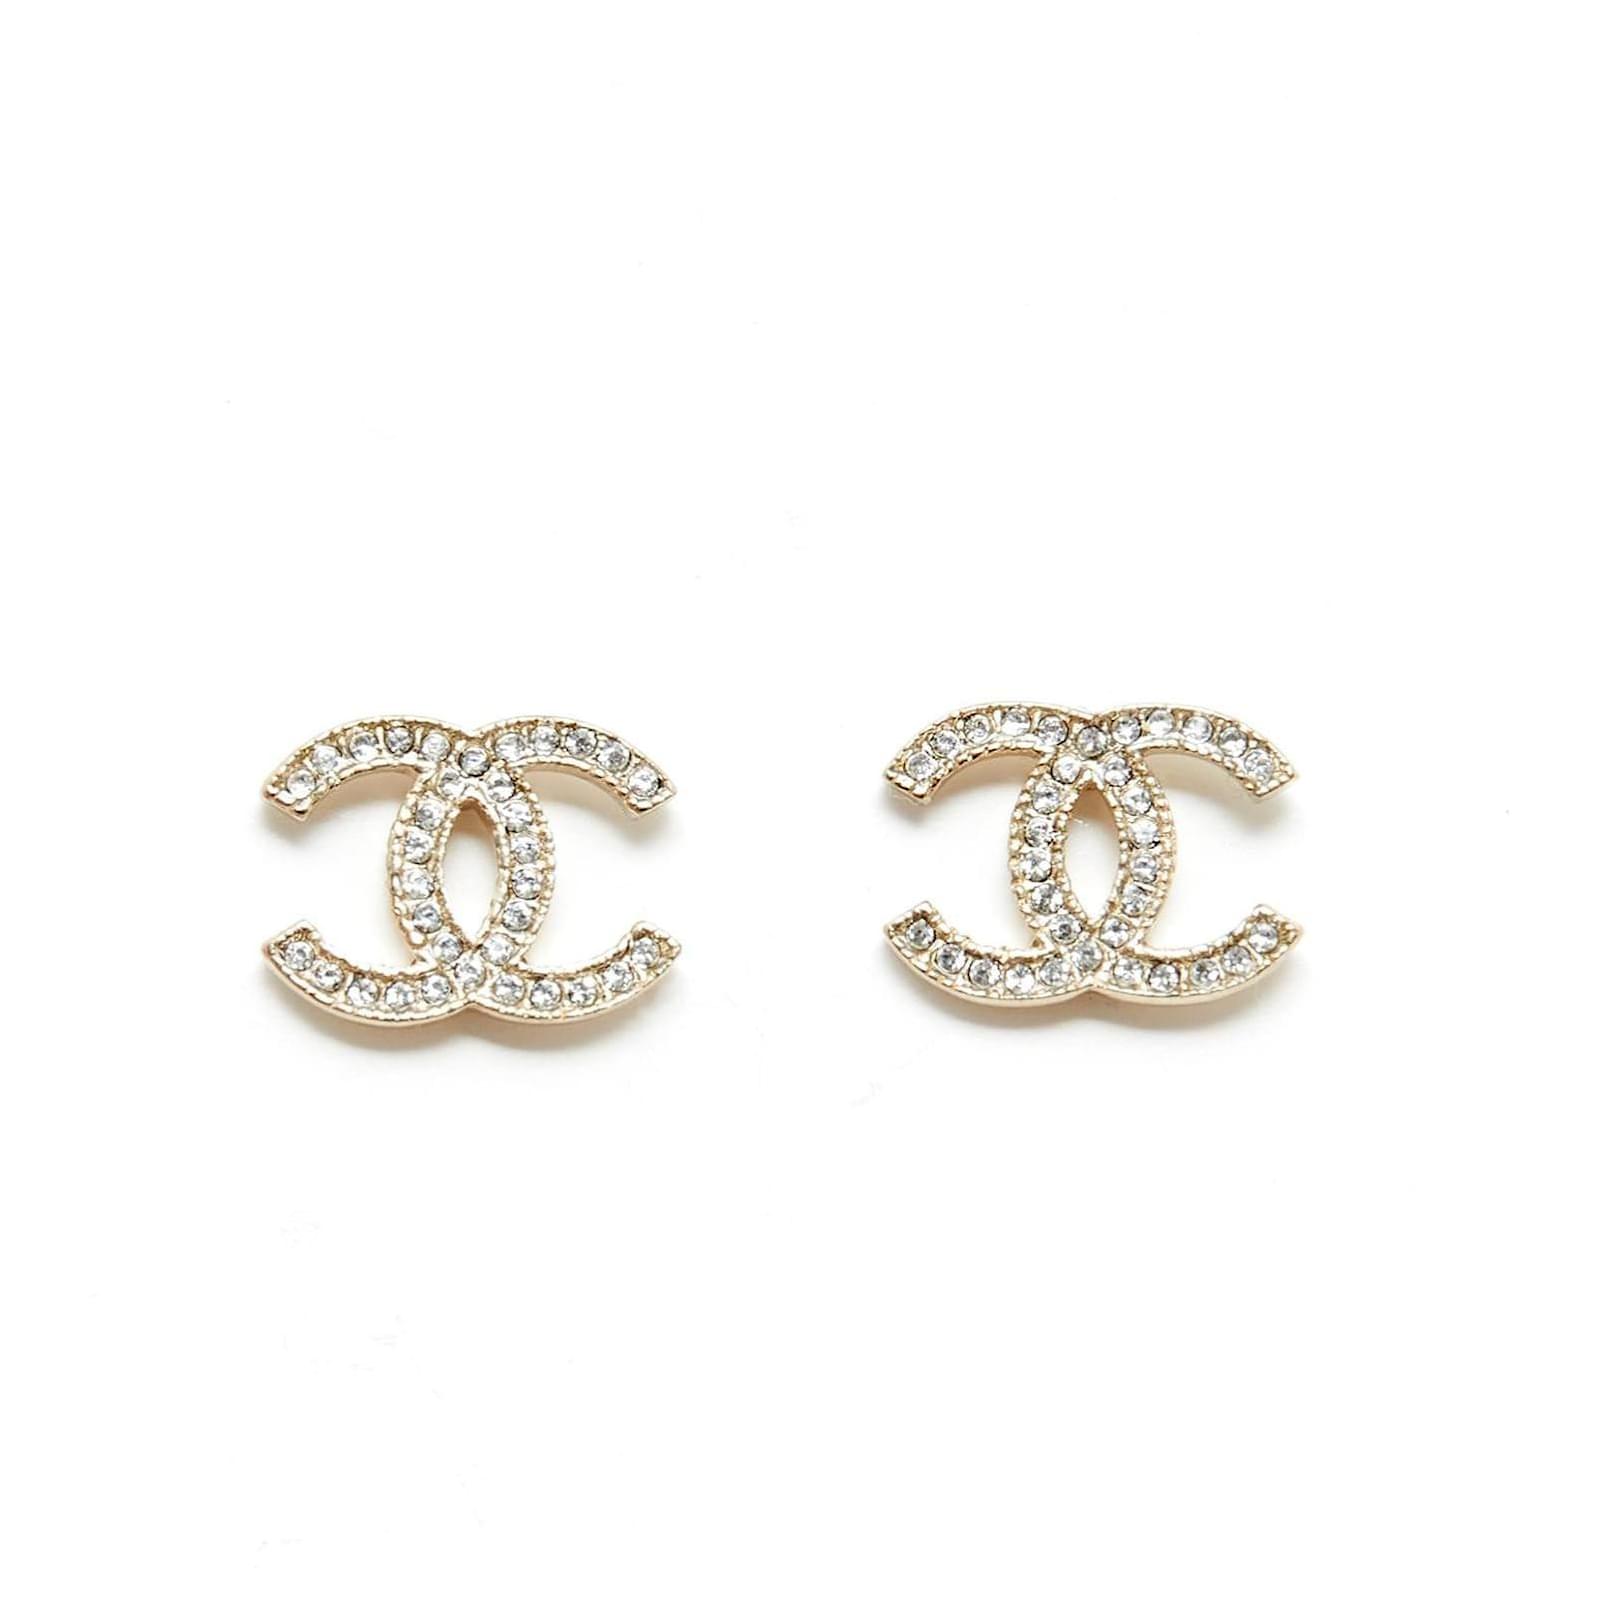 CHANEL CC Textured Gold Metal Stud Earrings 59 OFF